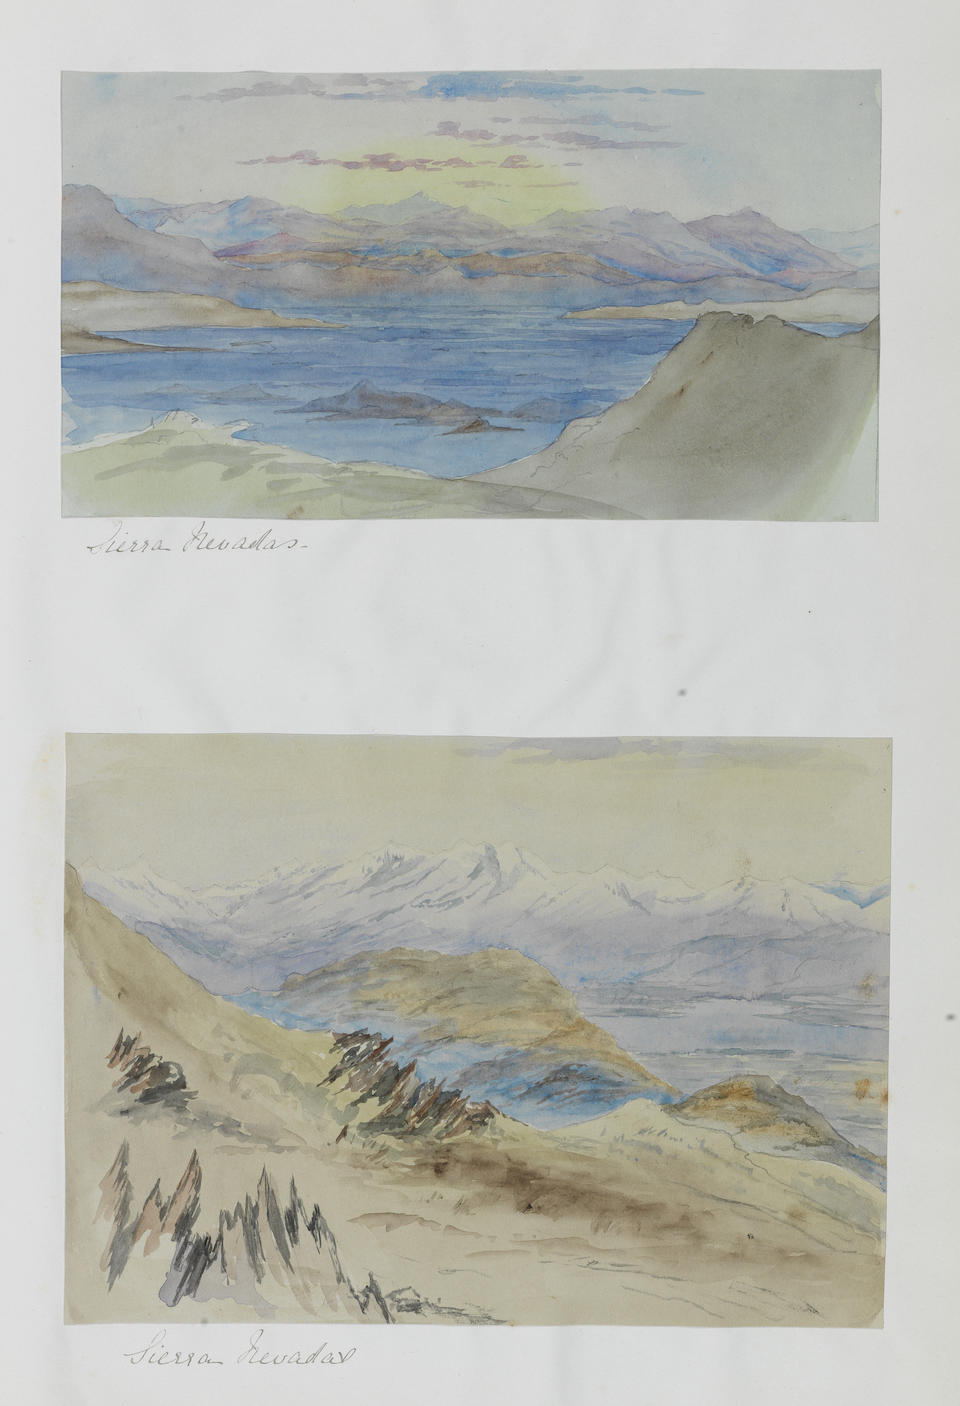 Two bound albums by William Soltan Davidson, b 1846 Embossed, containing watercolours of scenes of Scotland and New Zealand